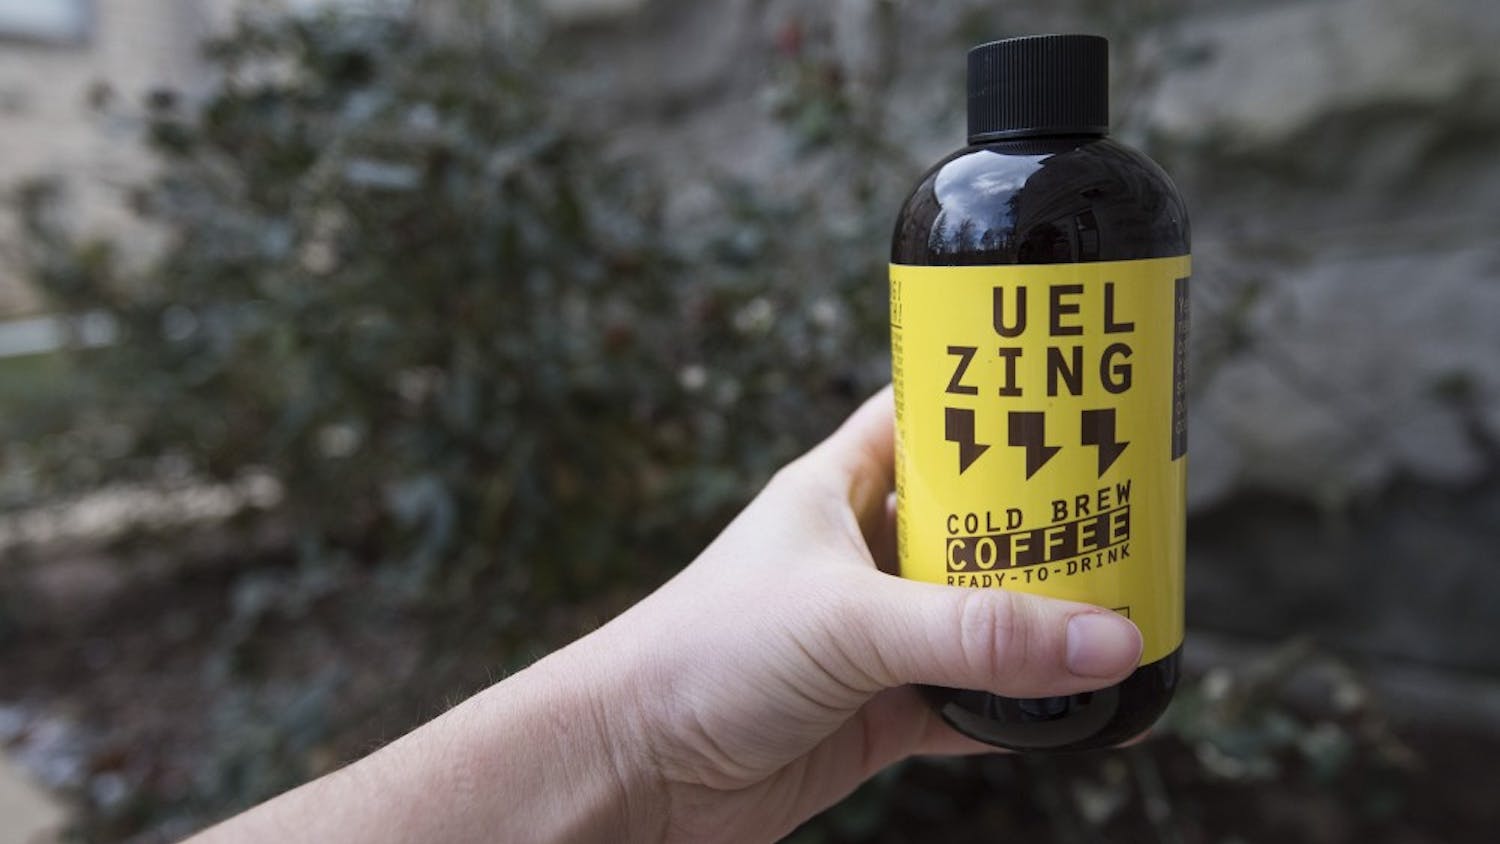 Uel Zing, a cold brew coffee shop that opened in 2013, announced they were ending their bottling operation at the end of 2017. They said although they still believe in their product, it was difficult to make a high quality bottled beverage sold at a reasonable price.&nbsp;